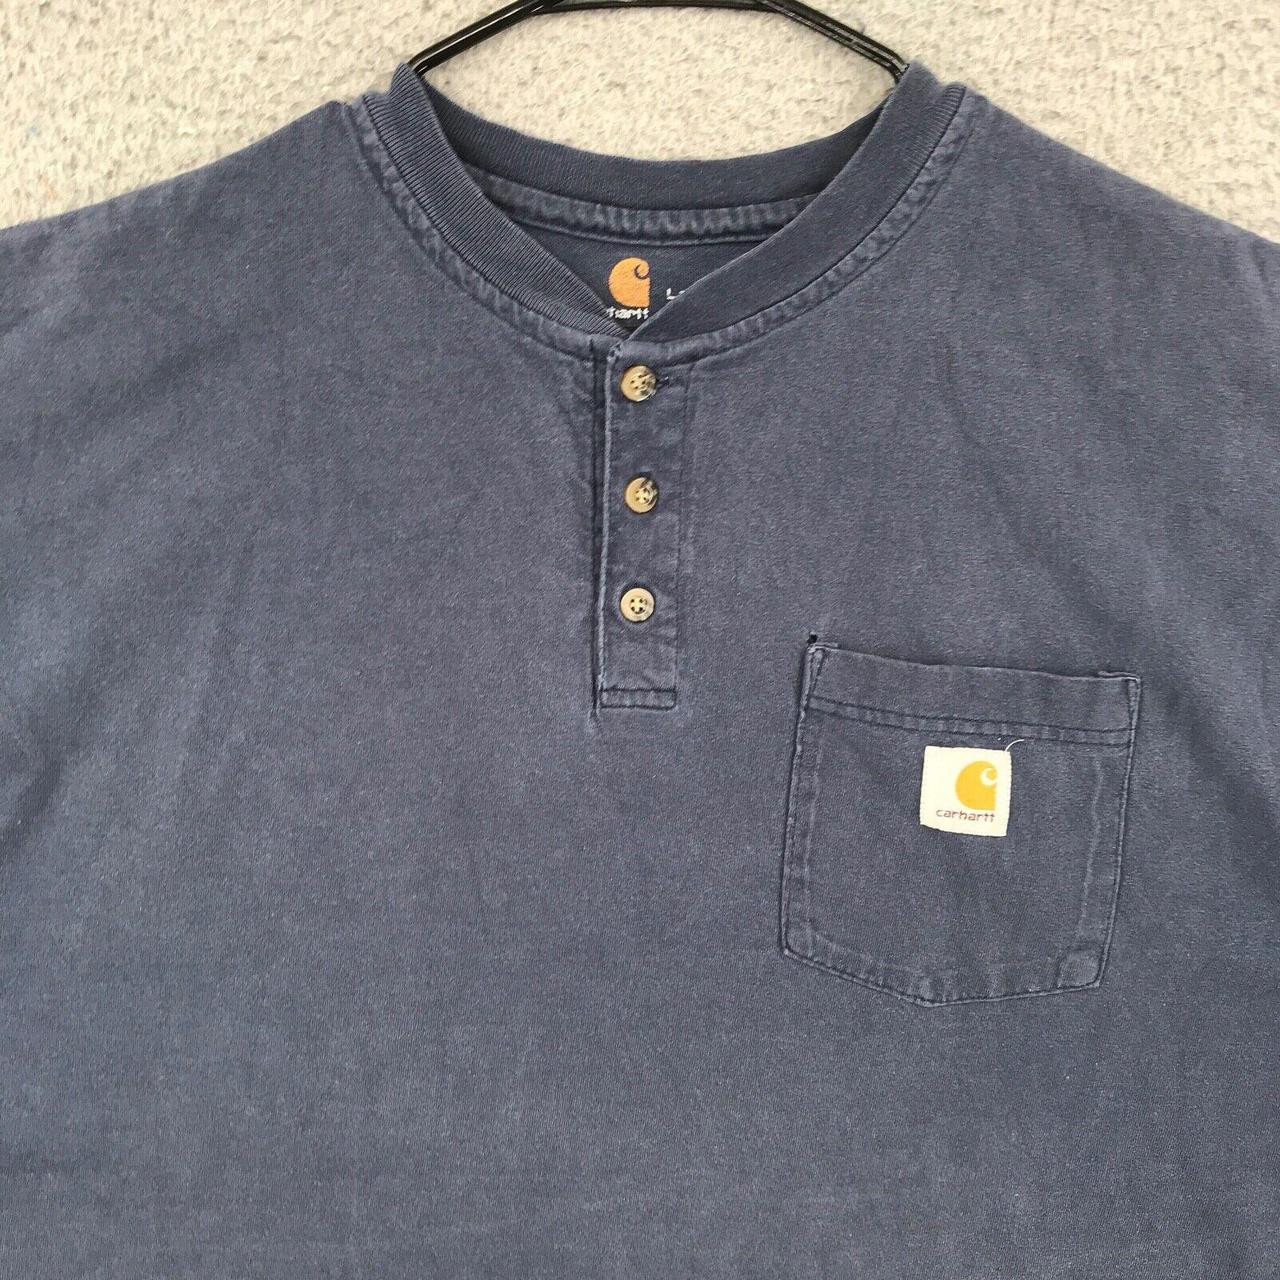 Product Image 3 - Carhartt Shirt Adult Large Tall